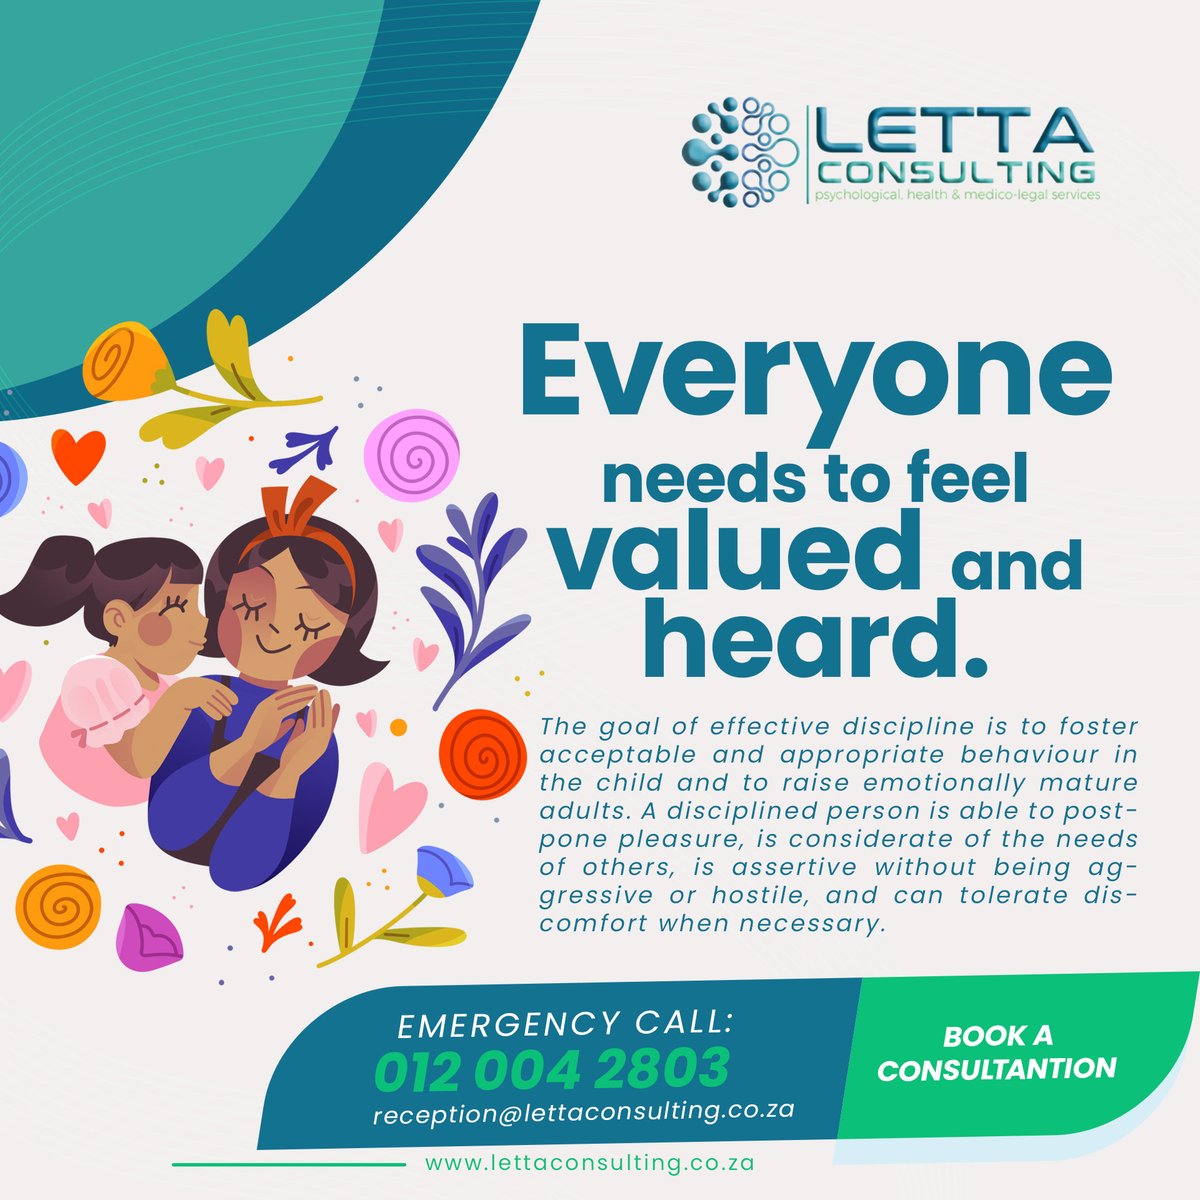 #love #relationships #therapy #psychologist #toxicpeople #parenting #childpsychologist
#therapy
Let us help today
buff.ly/48bnwBA
Call us at 012 004 2803
Whatsapp 0657213258
Email: reception@lettaconsulting.co.za
Visit our website at buff.ly/3PnTCCD